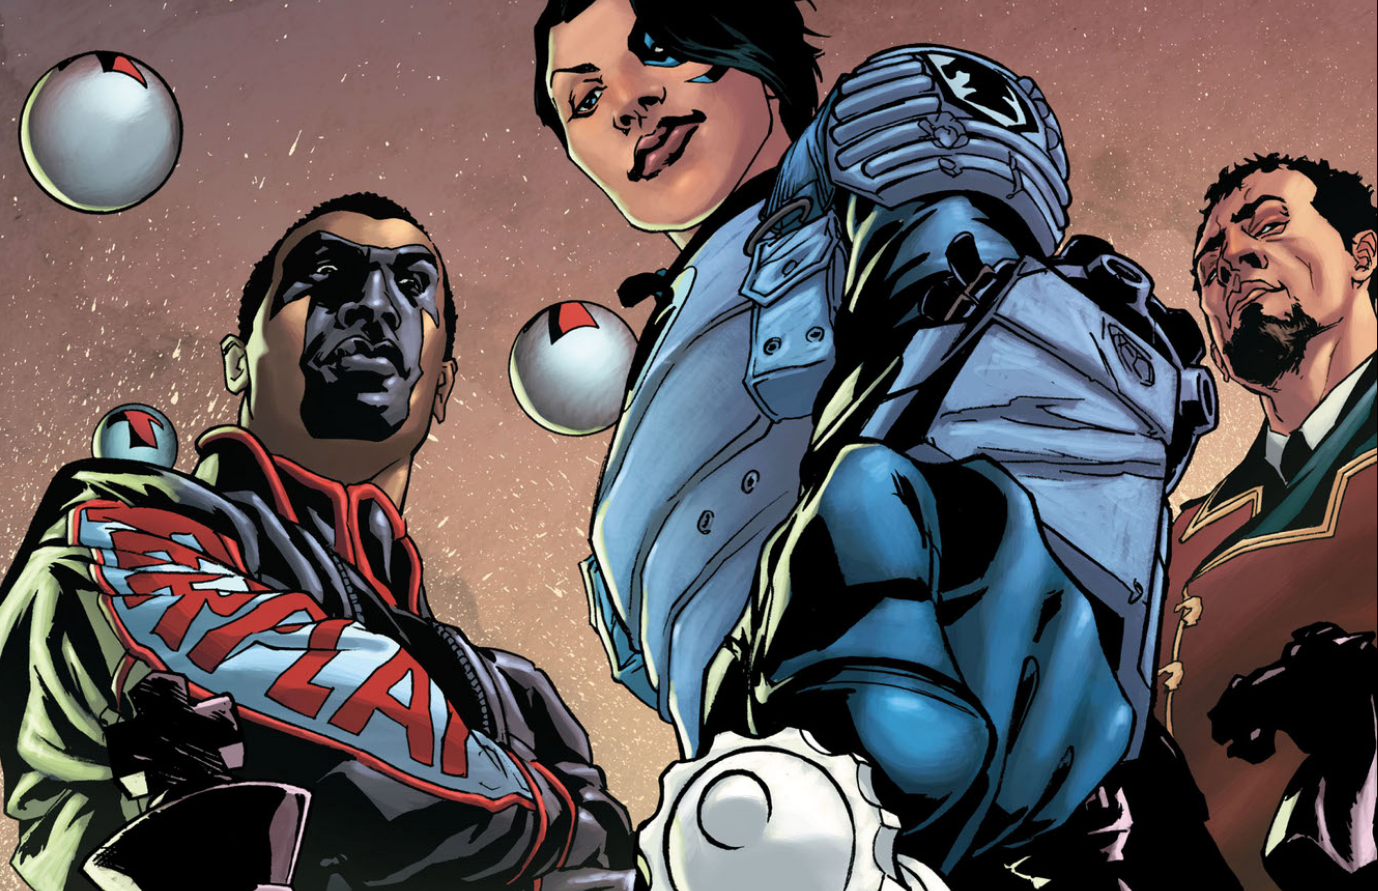 More Than A Decade Ago, Checkmate Gave Readers A Brilliant Fusion Of Politics And Superheroes